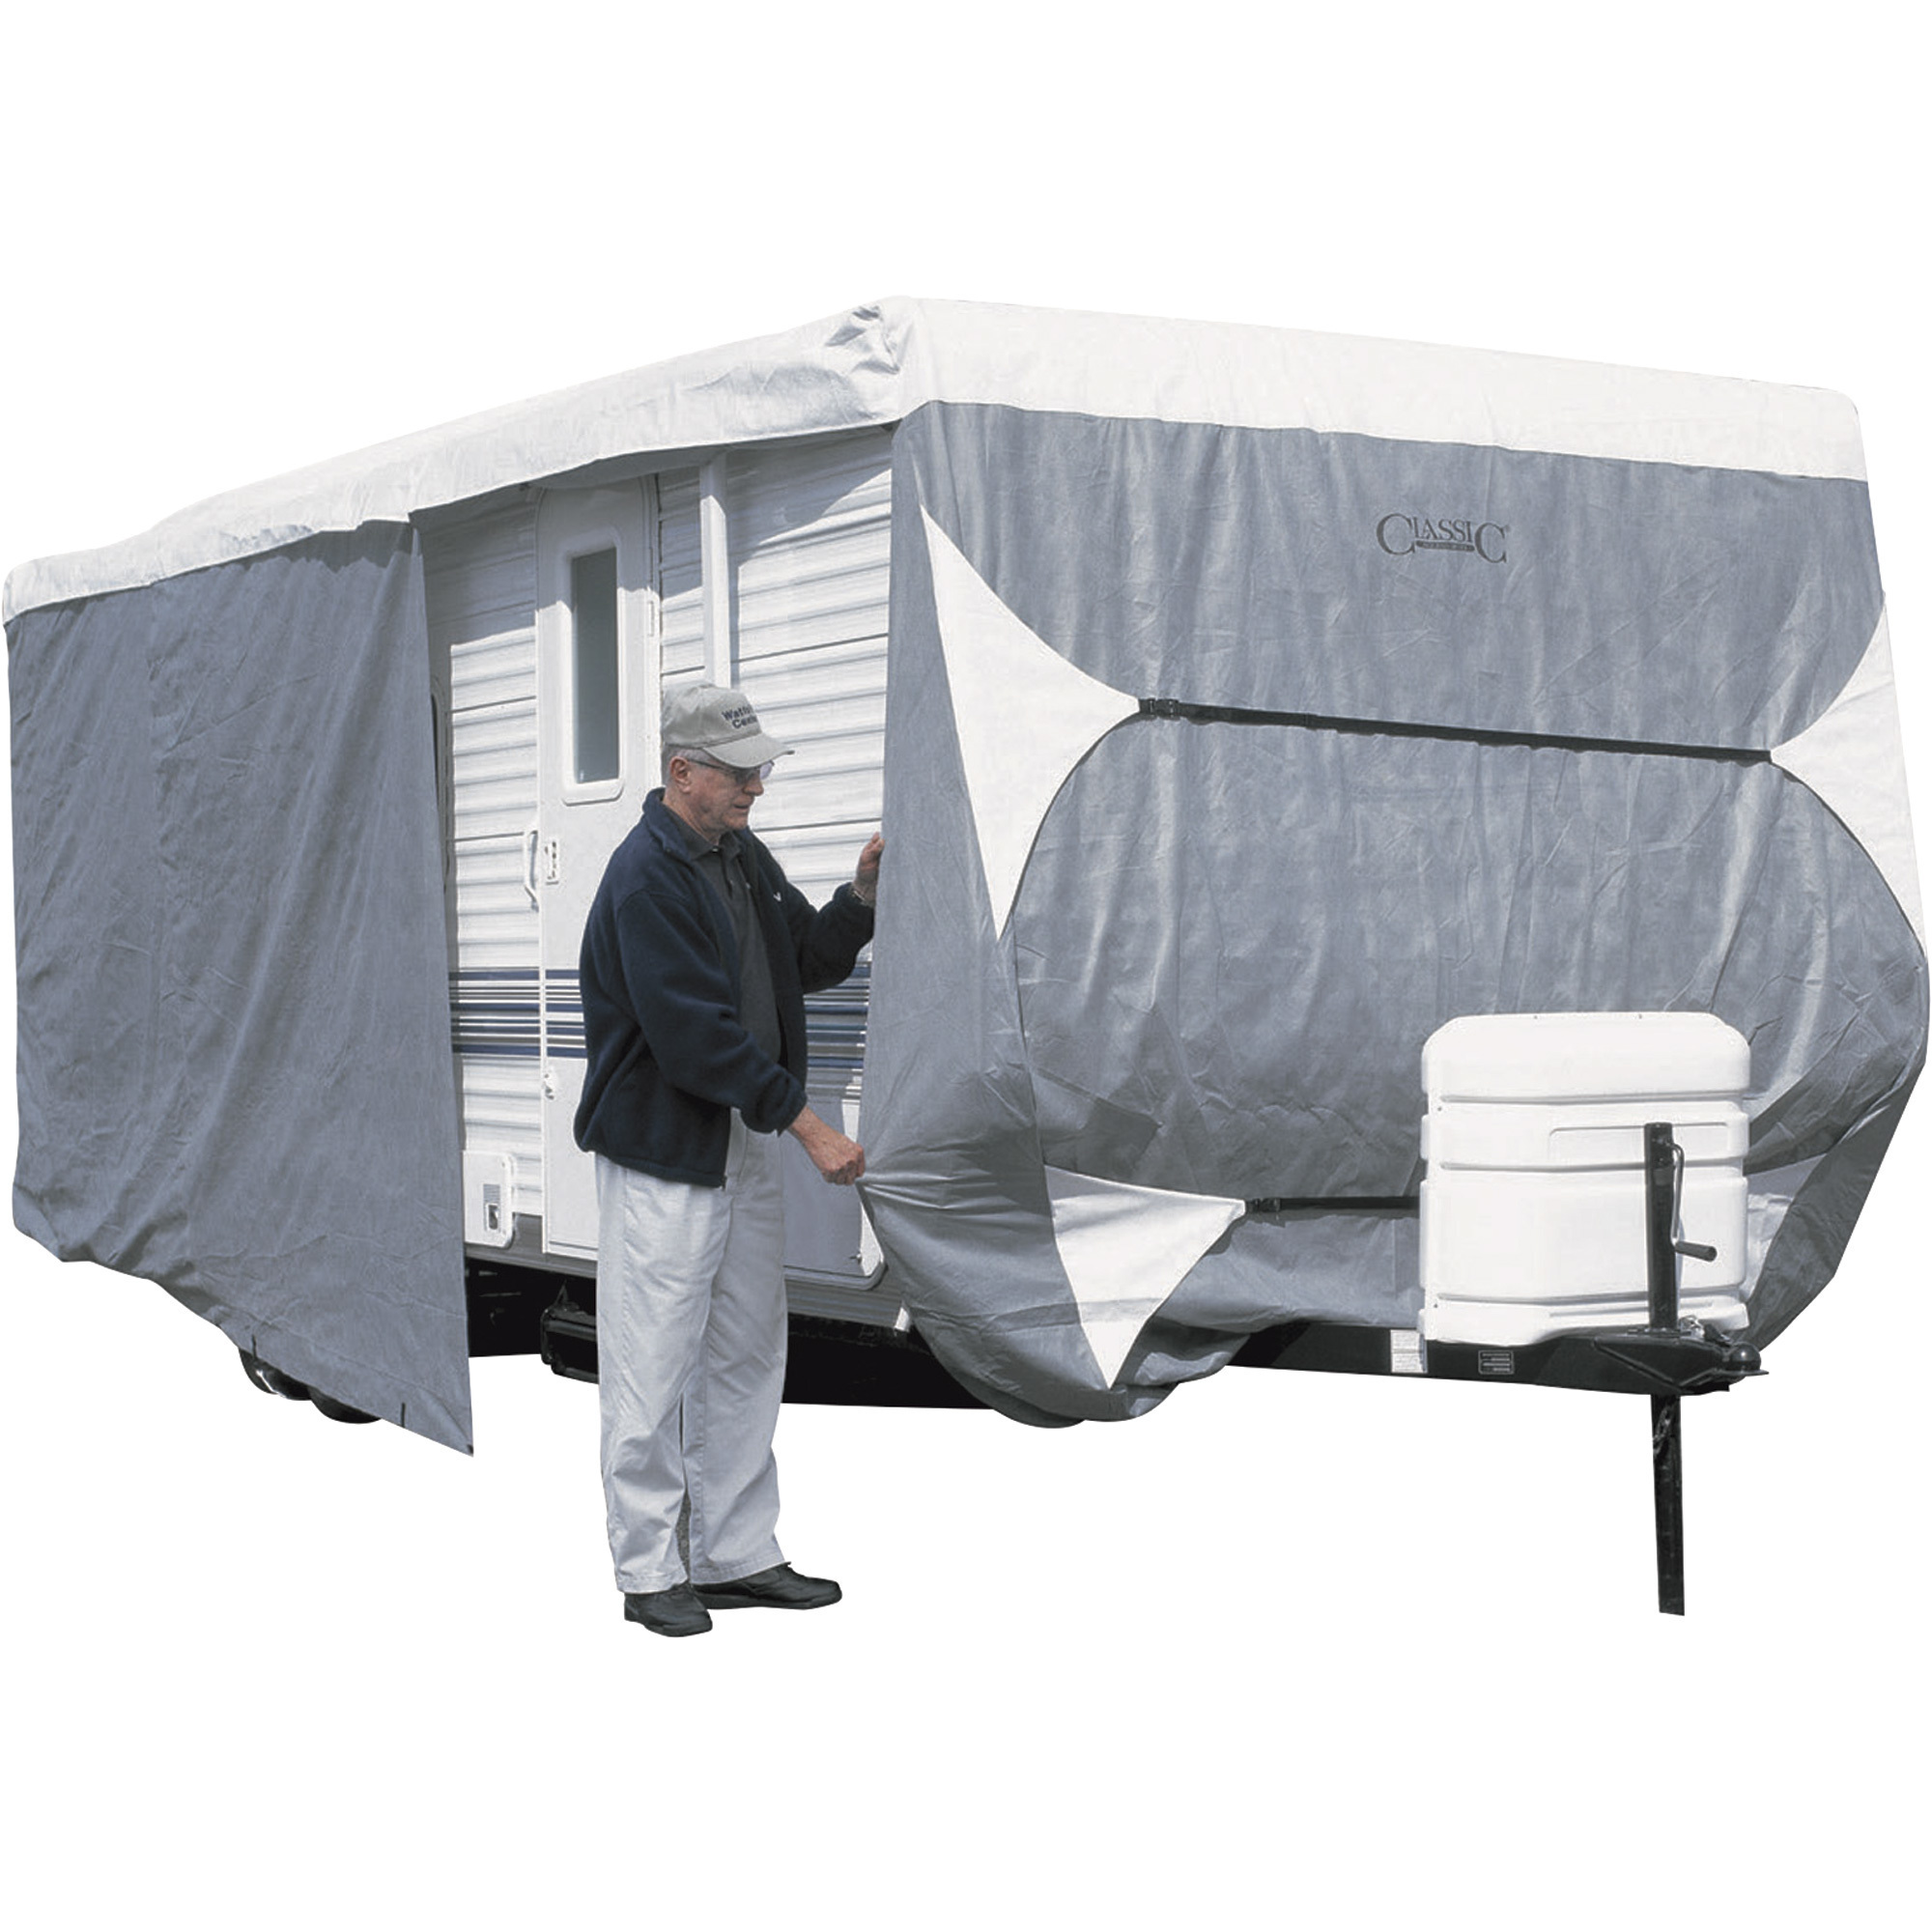 Classic Accessories OverDrive PolyPro Deluxe Travel Trailer Cover — Model  4, Gray and White, Fits x RVs, Model# 73463  Northern Tool